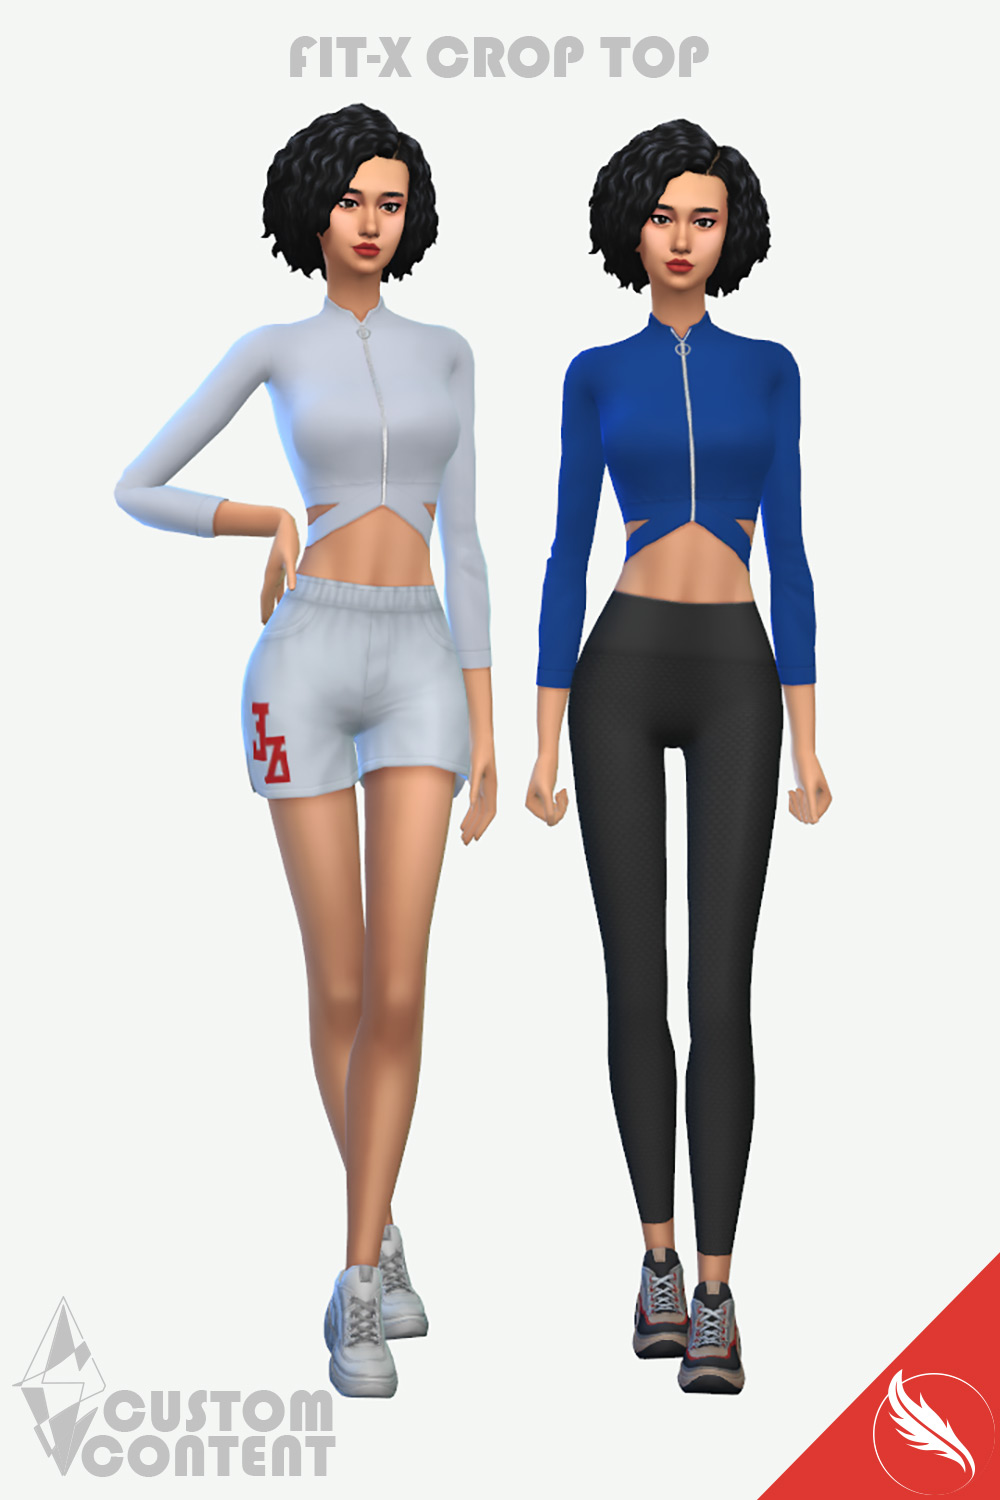 The Sims 4 Clothing